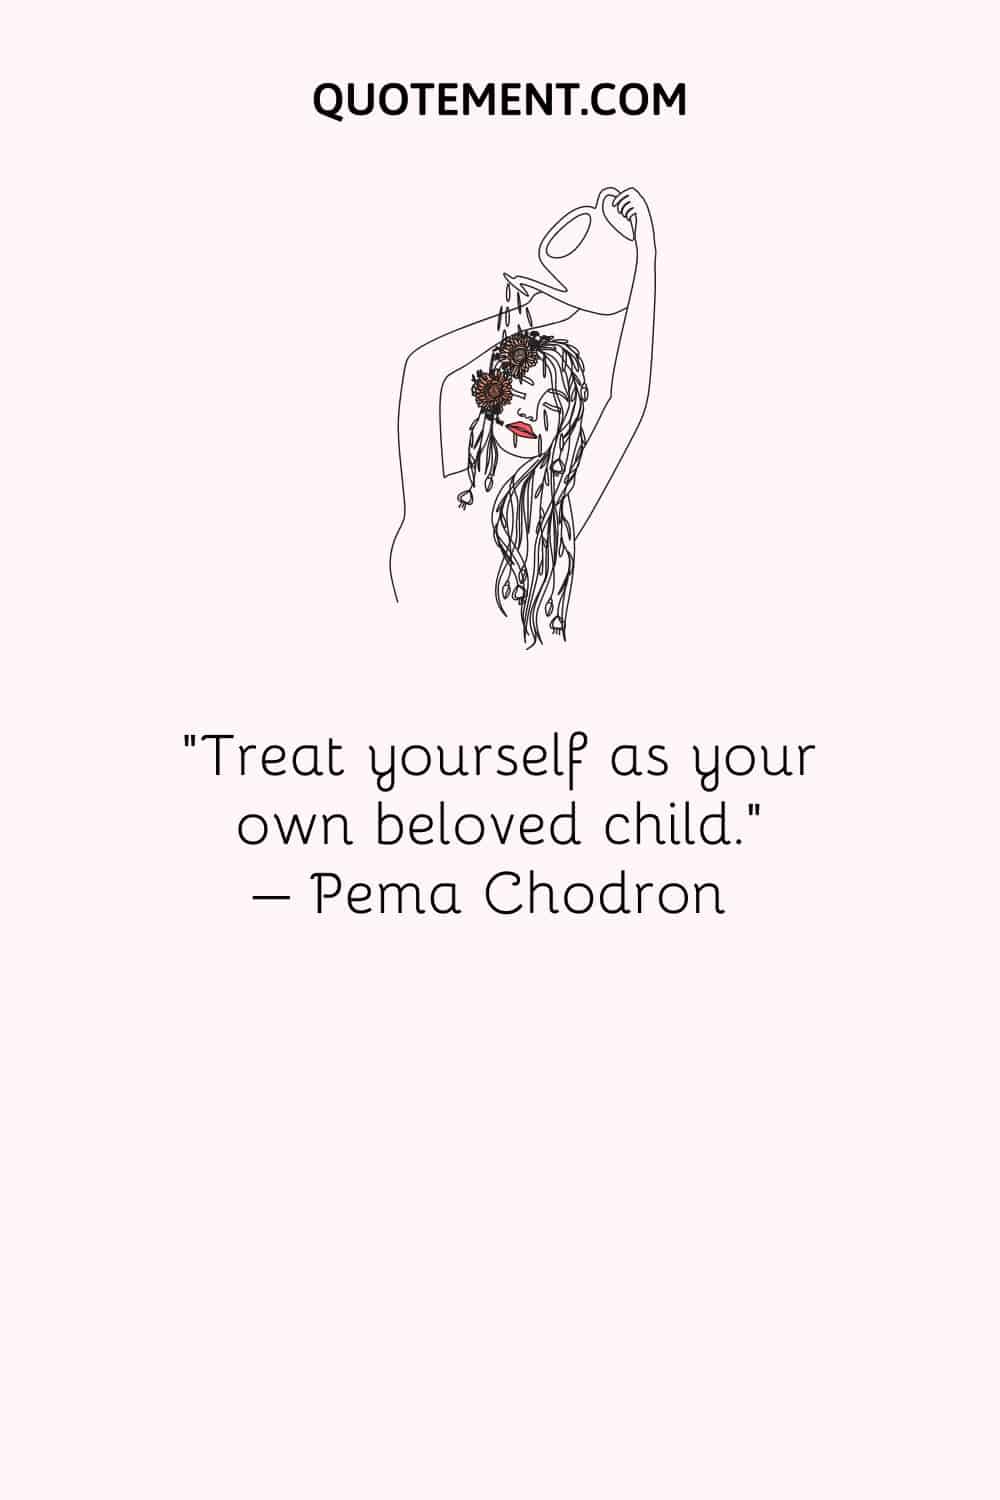 Treat yourself as your own beloved child